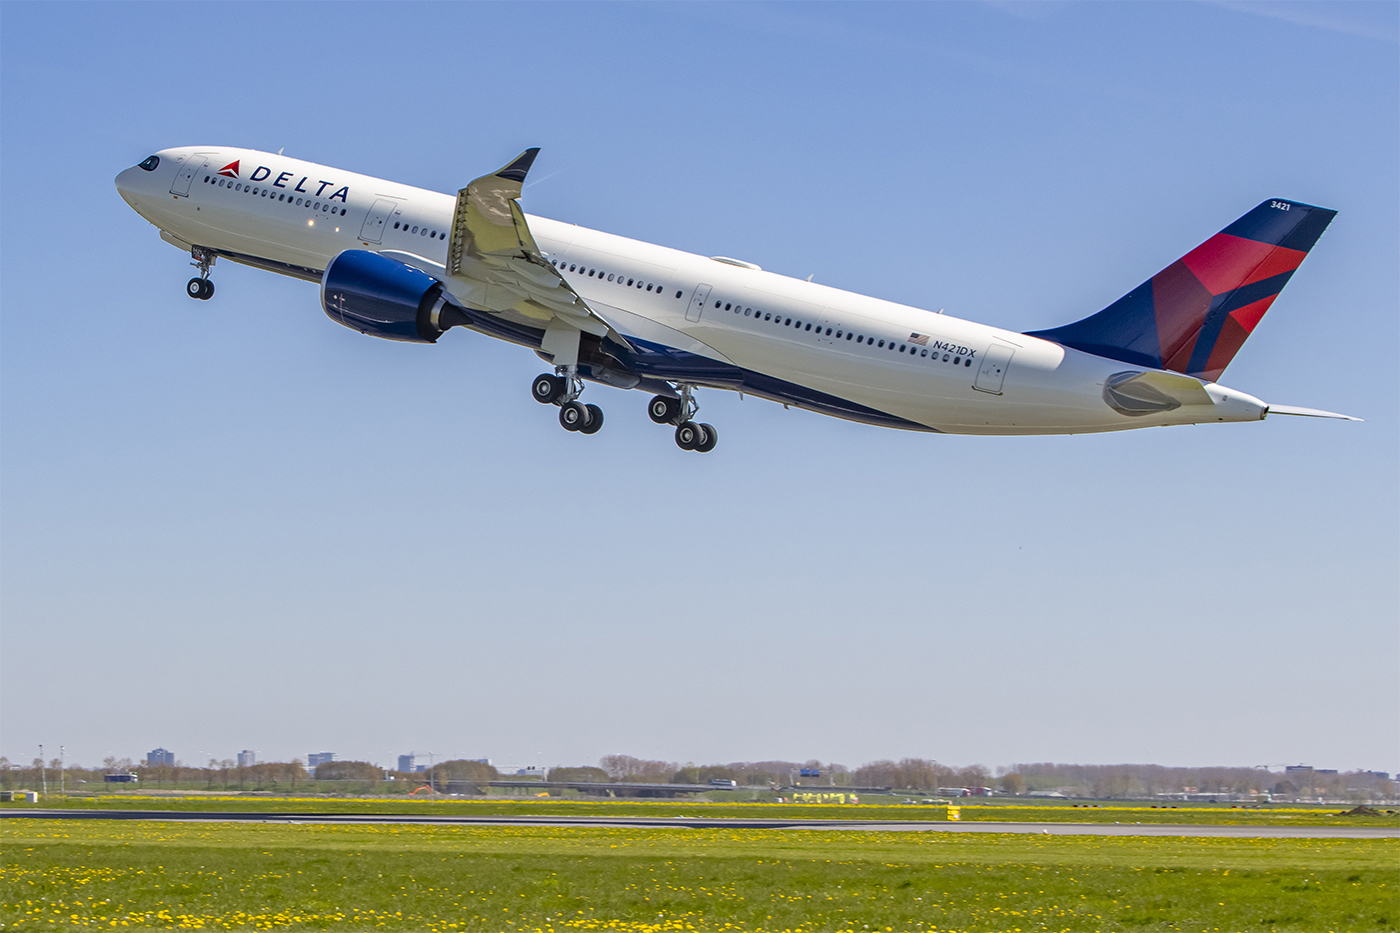 Delta Airlines airplane taking off from a runway